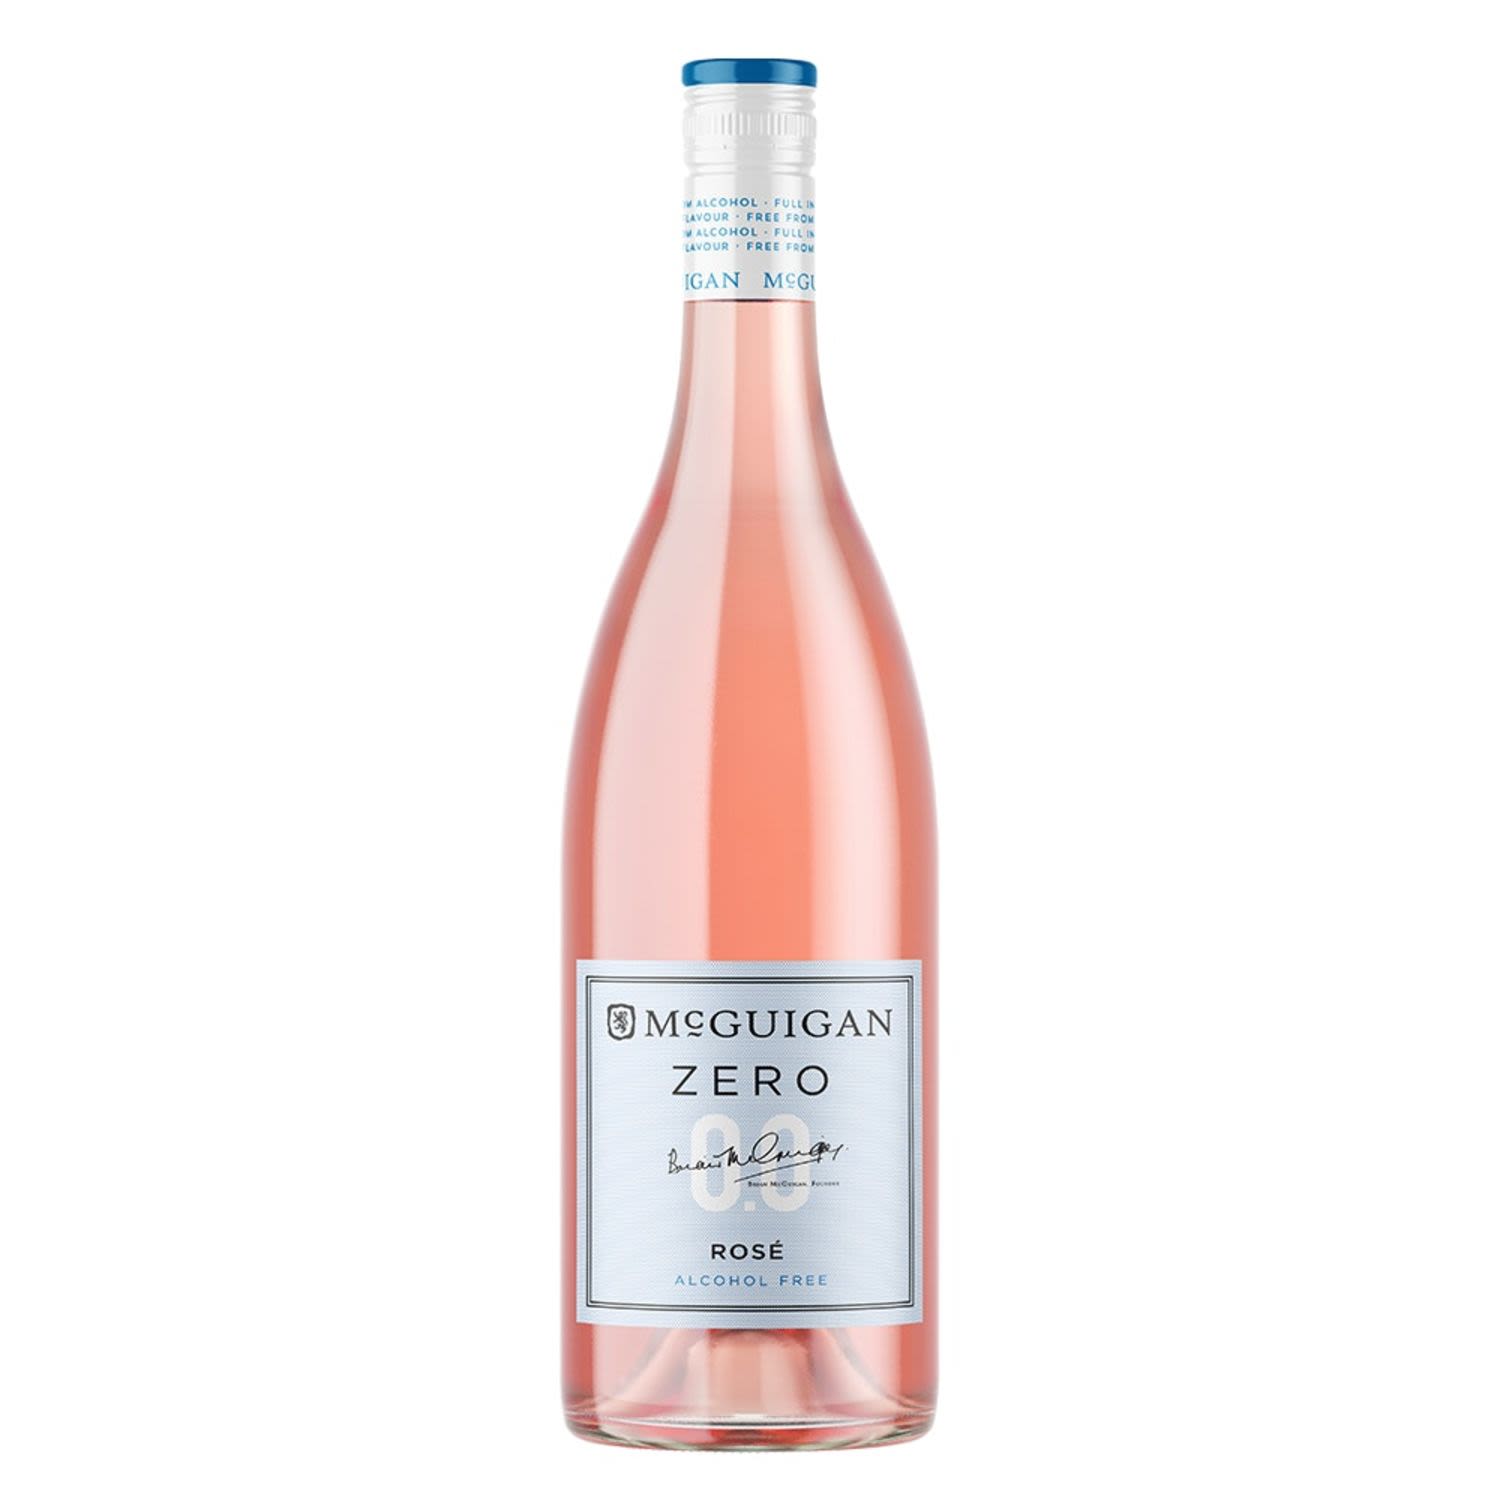 McGuigan Wines has launched their new alcohol free wines. This is fruity, fresh and very slightly sweet up-front but finishes with a lively, dry finish.<br /> <br />Alcohol Volume: 0.00%<br /><br />Pack Format: Bottle<br /><br />Standard Drinks: 0</br /><br />Pack Type: Bottle<br /><br />Country of Origin: Australia<br /><br />Region: South Eastern Australia<br /><br />Vintage: Vintages Vary<br />